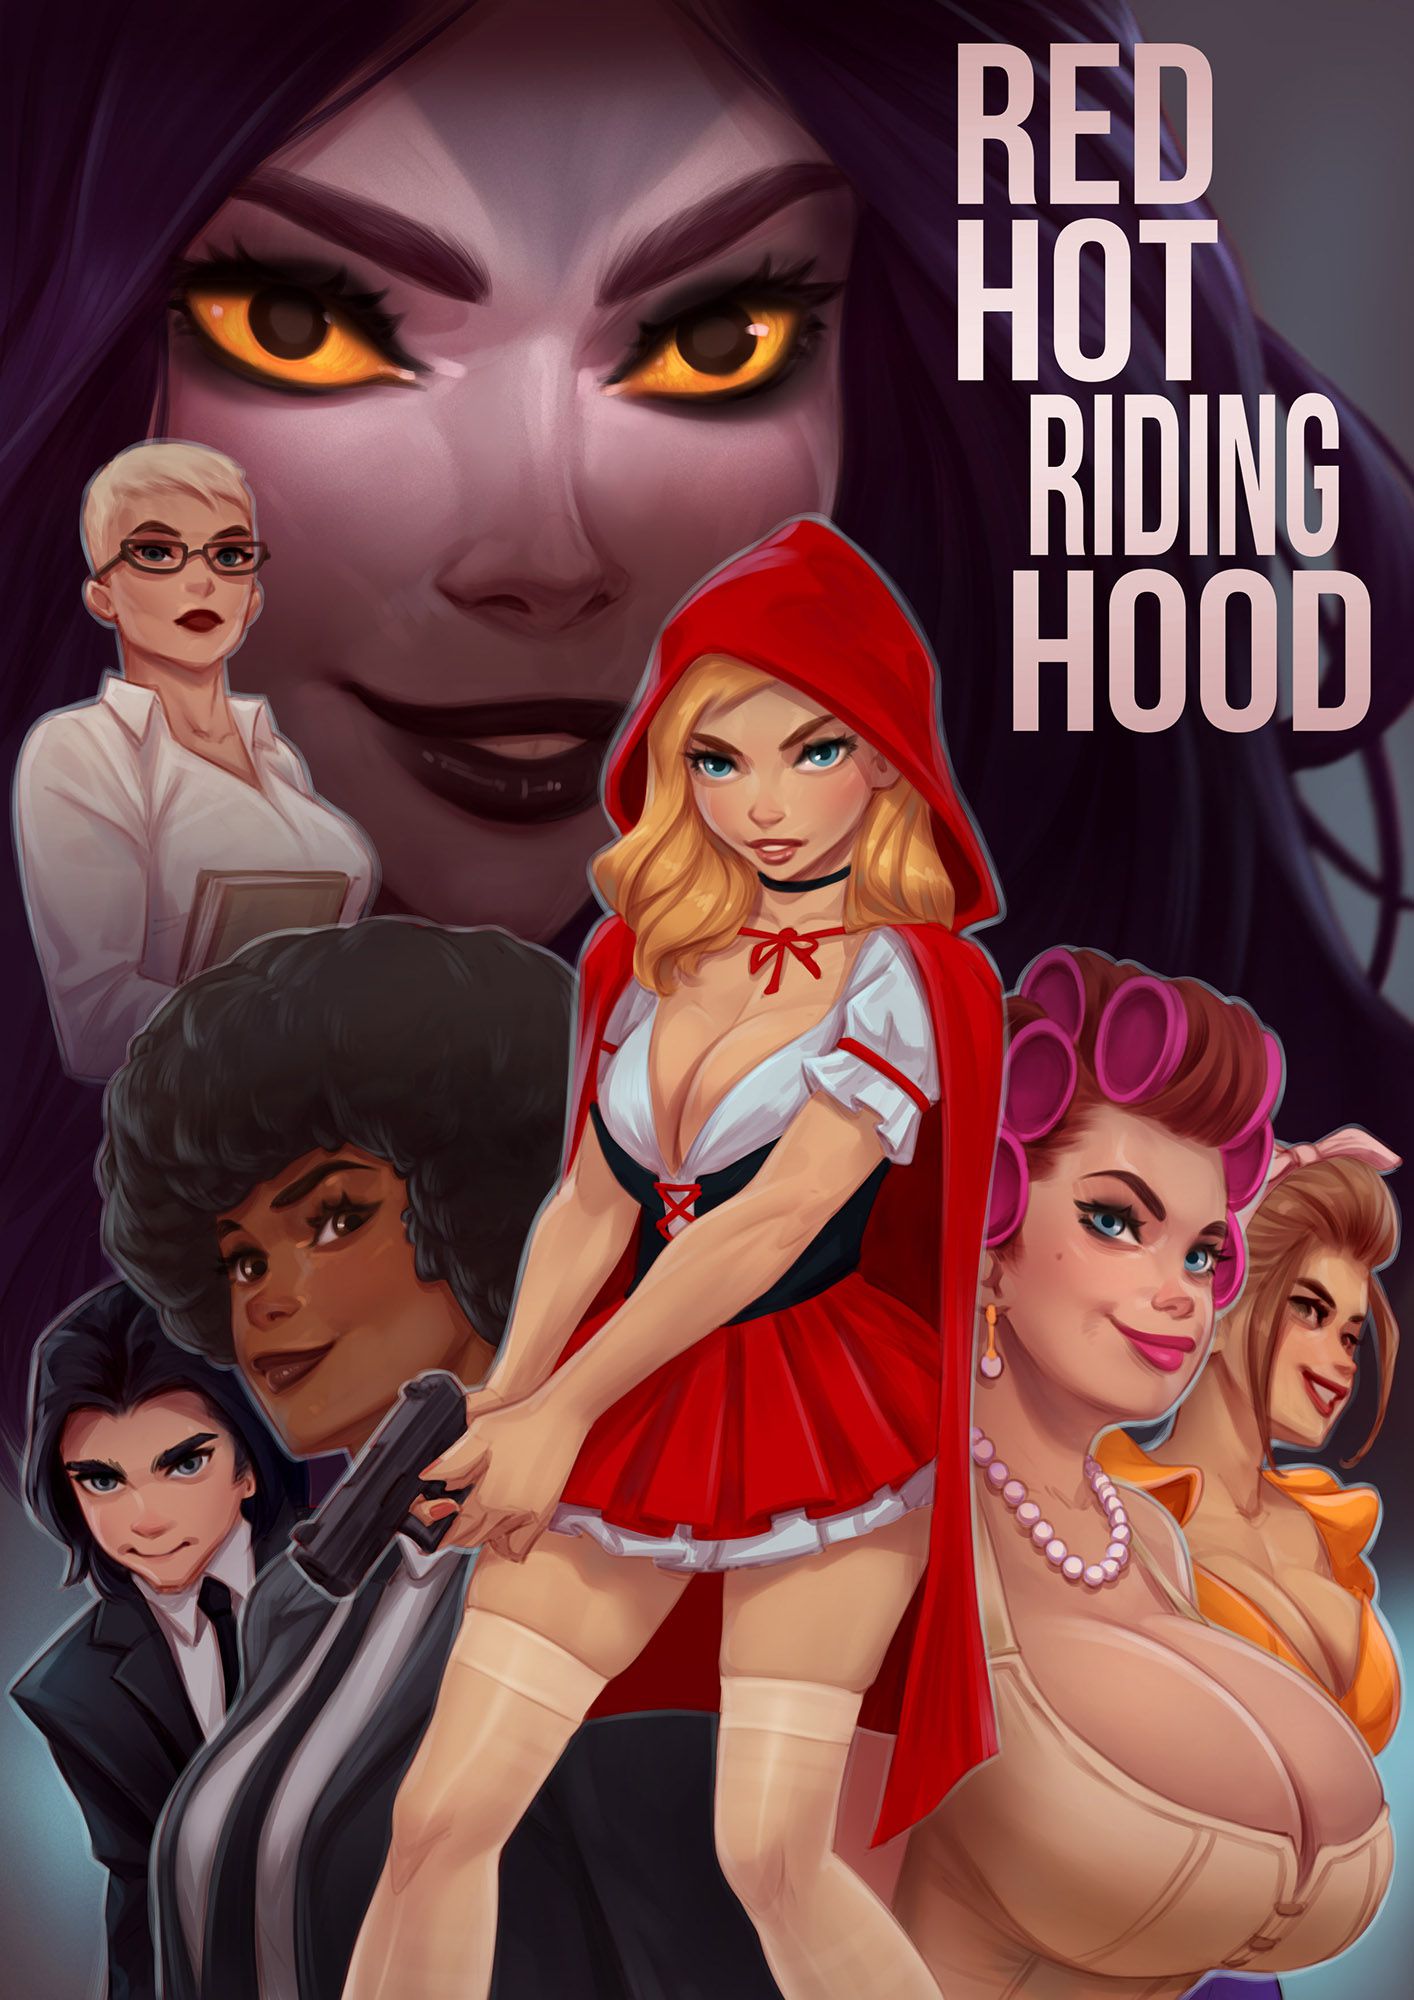 Red hot riding hood porn